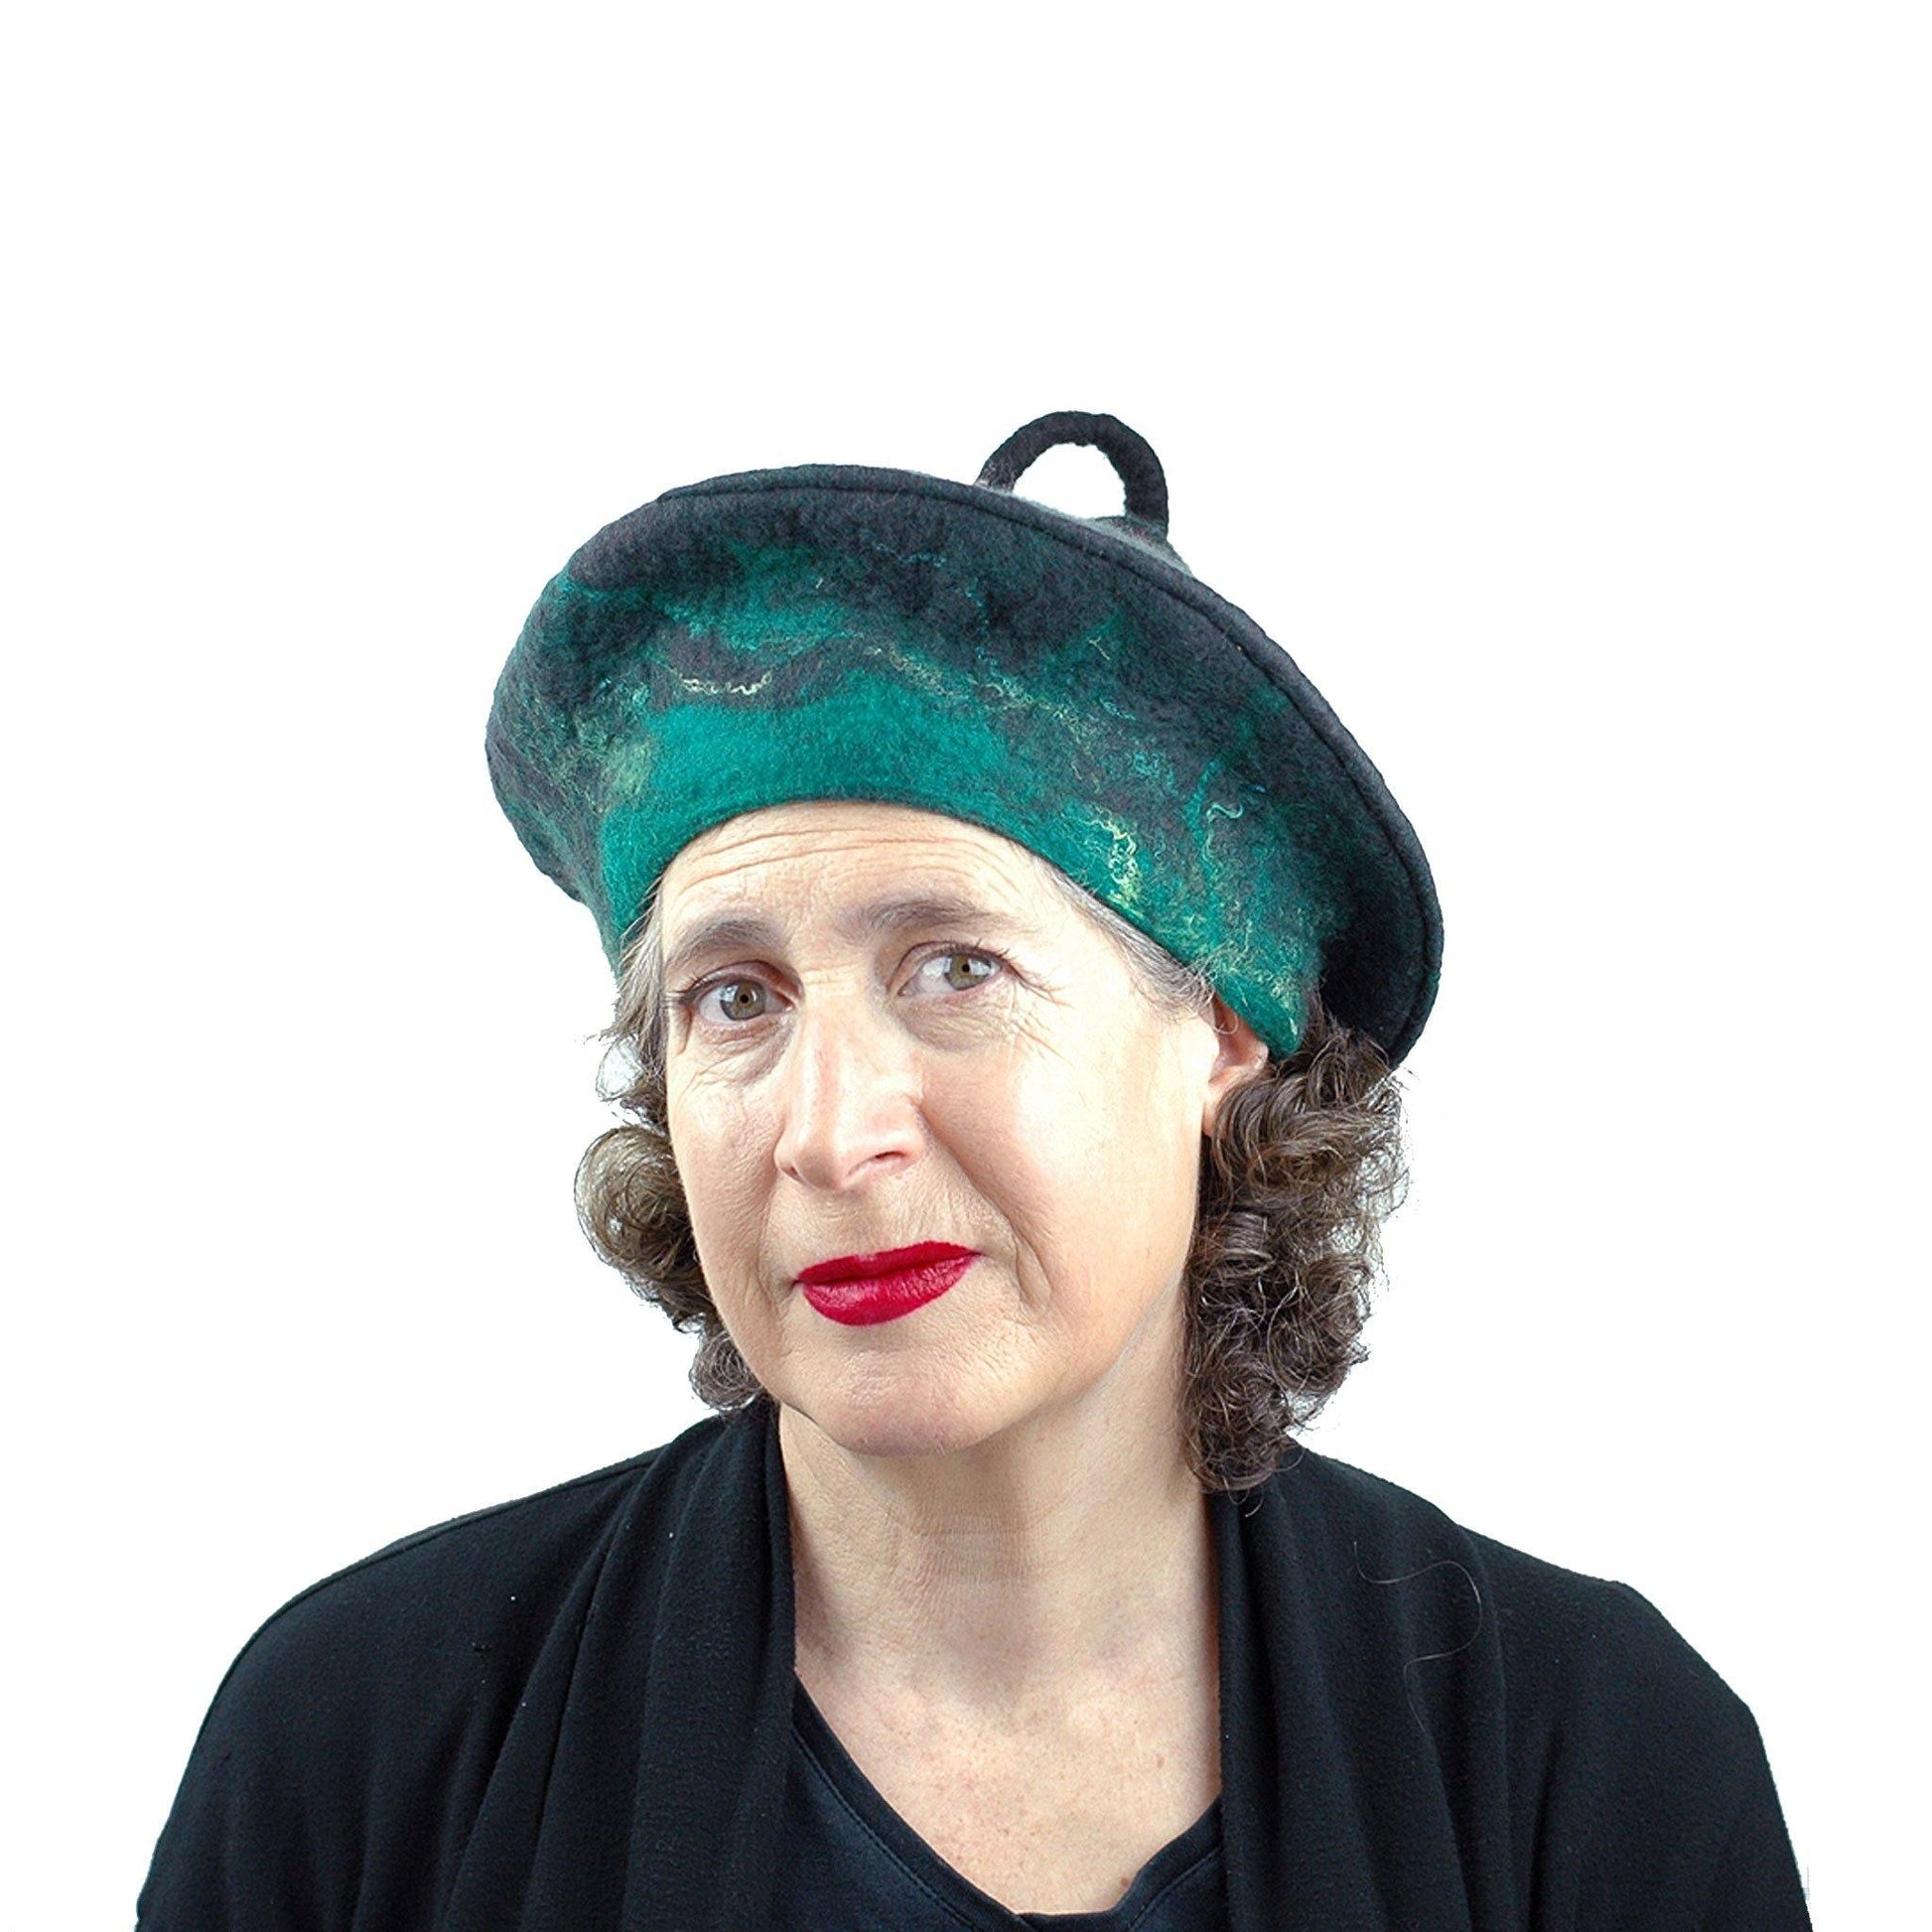 Black and Green Felted Beret with Curlicue on Top - threequarters view